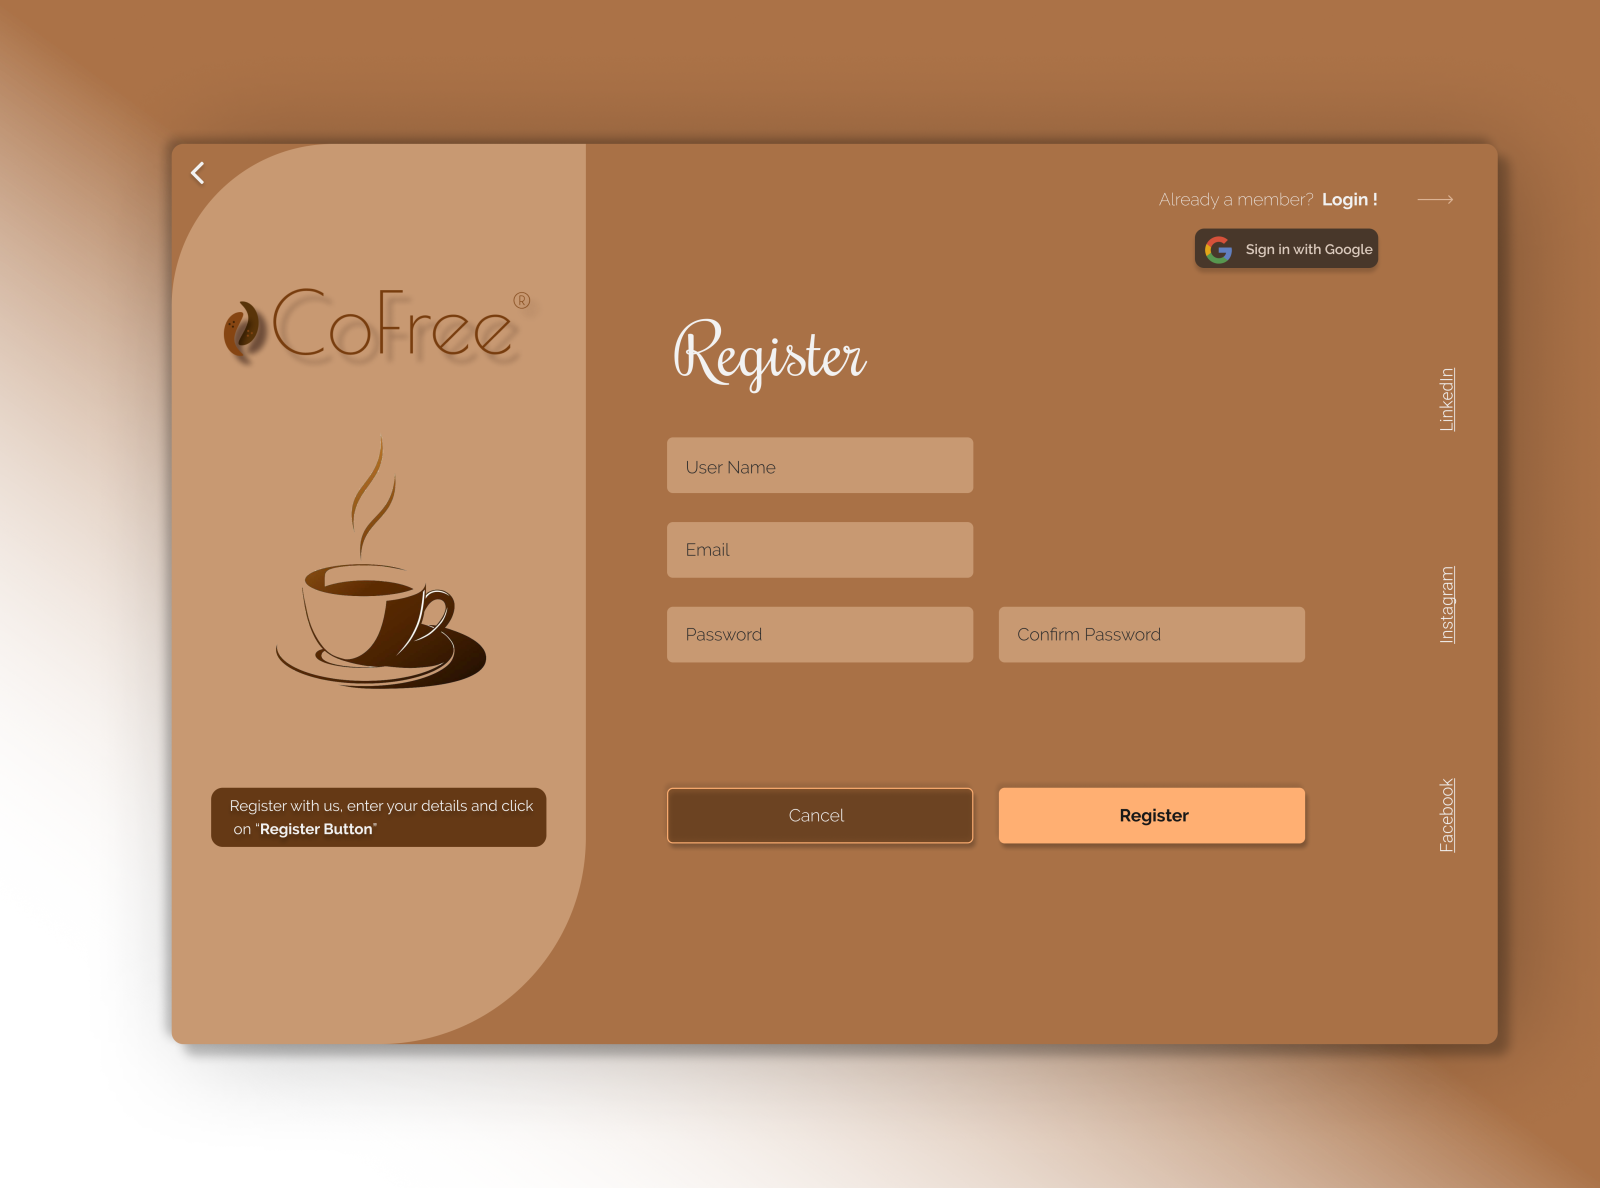 cofree-app-presentation-register-page-by-miguel-vanzeler-on-dribbble